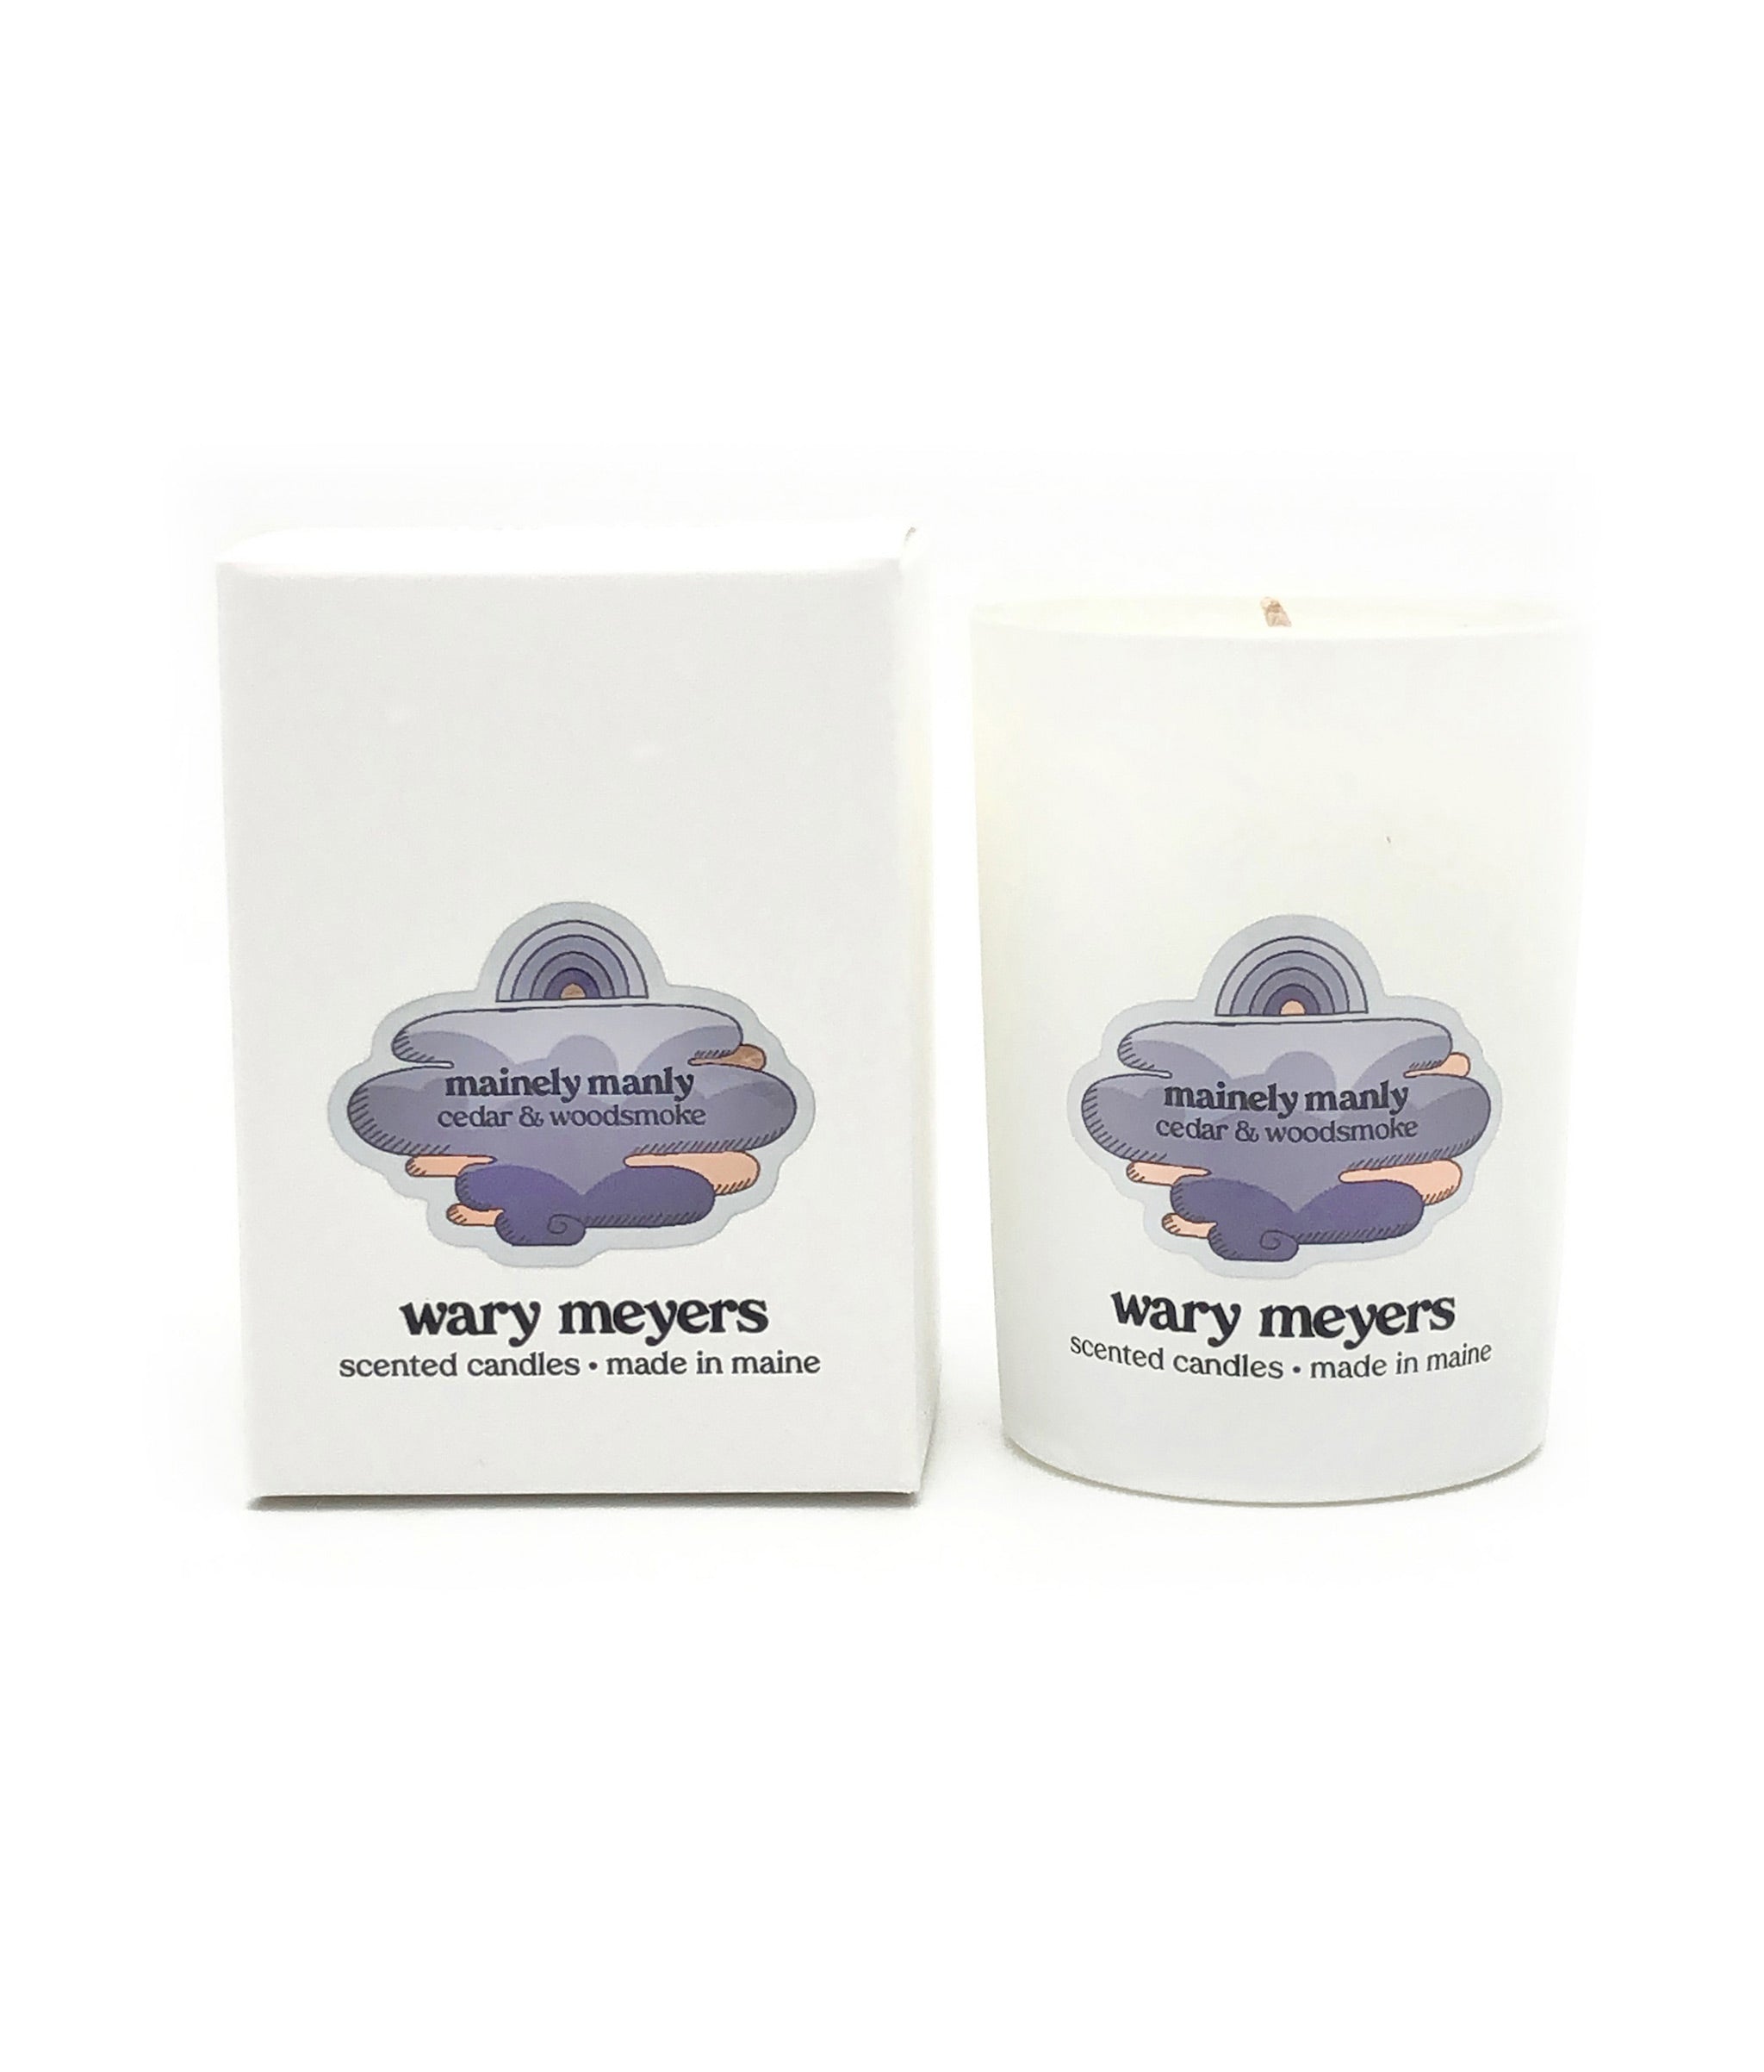 Mainly Manly Candle. White box and soy wax candle in glass holder by Wary Meyers, illustrated with lavender clouds.